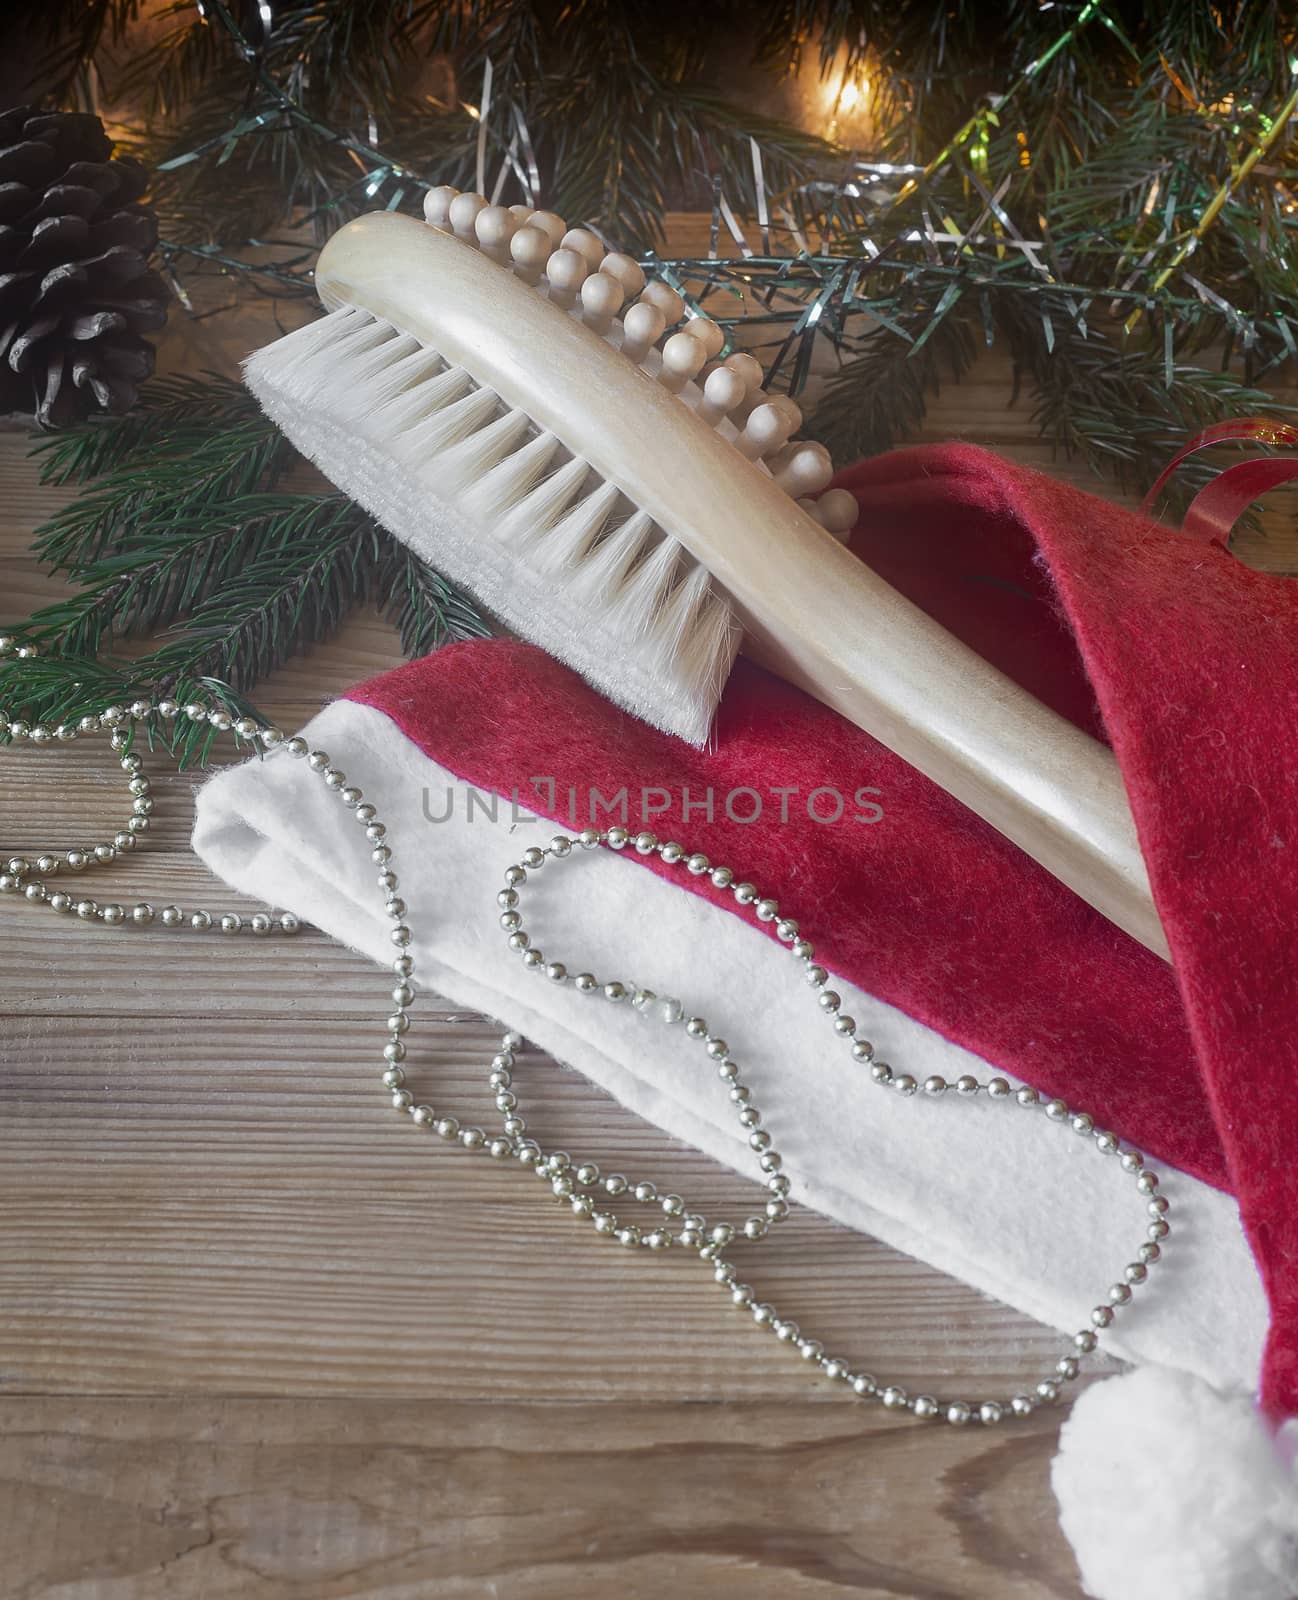 Wooden Spa massage brush and Christmas decorations: Christmas tree, garlands, cones on a wooden background, Christmas Wellness concept